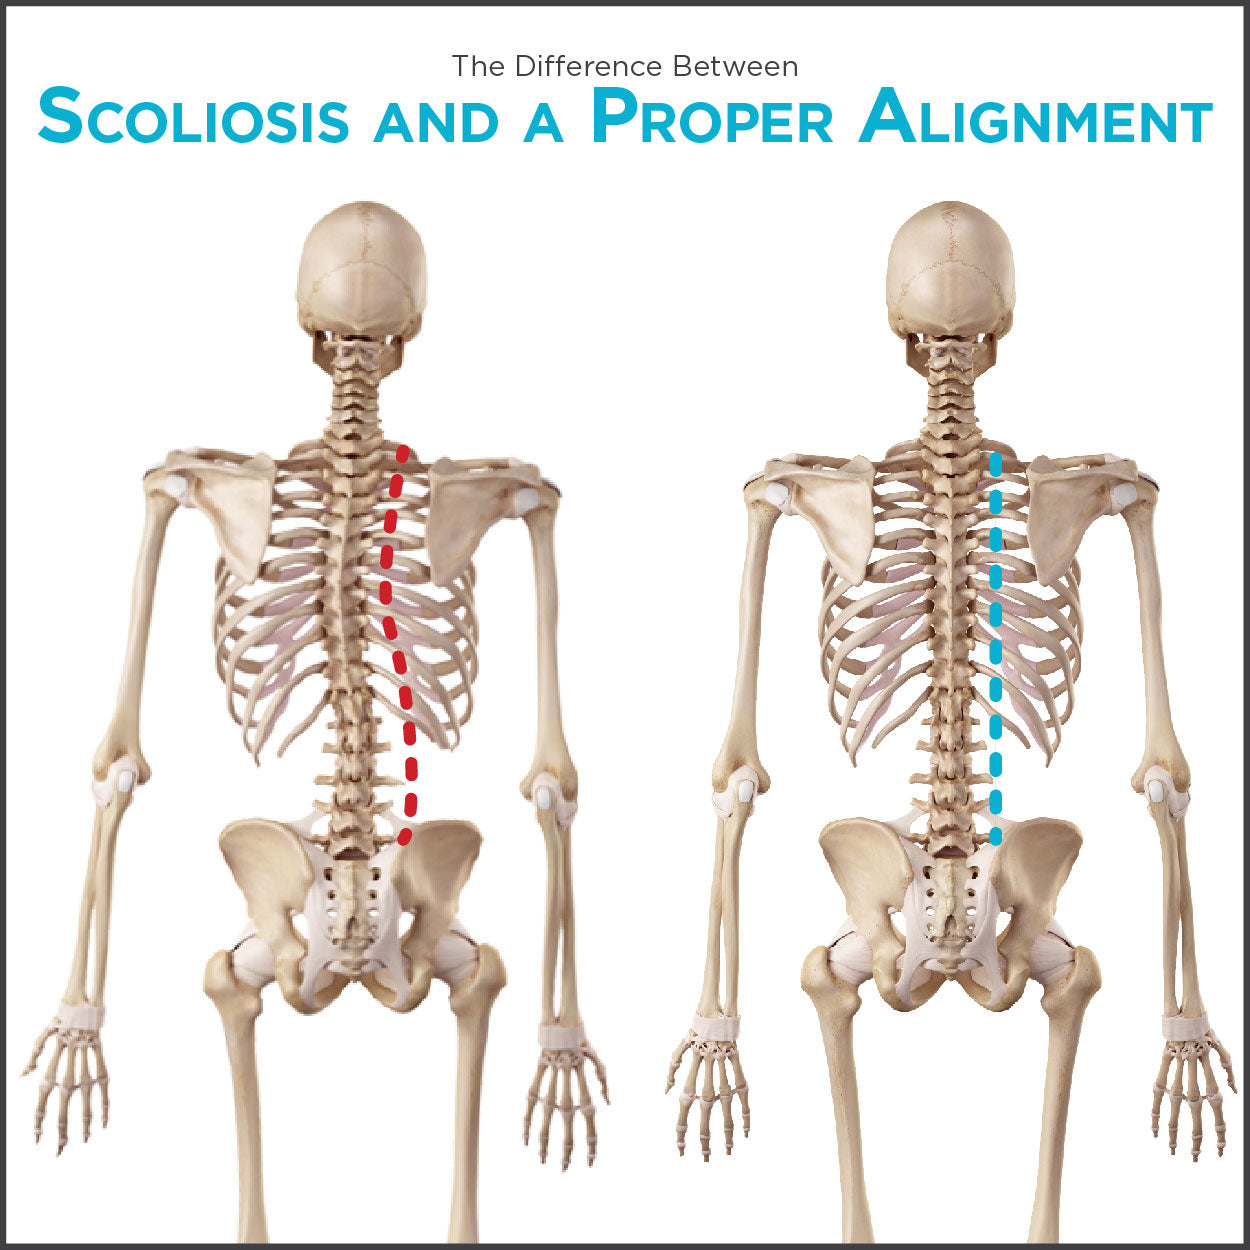 comparison chart of what scoliosis looks like vs how a healthy spine looks